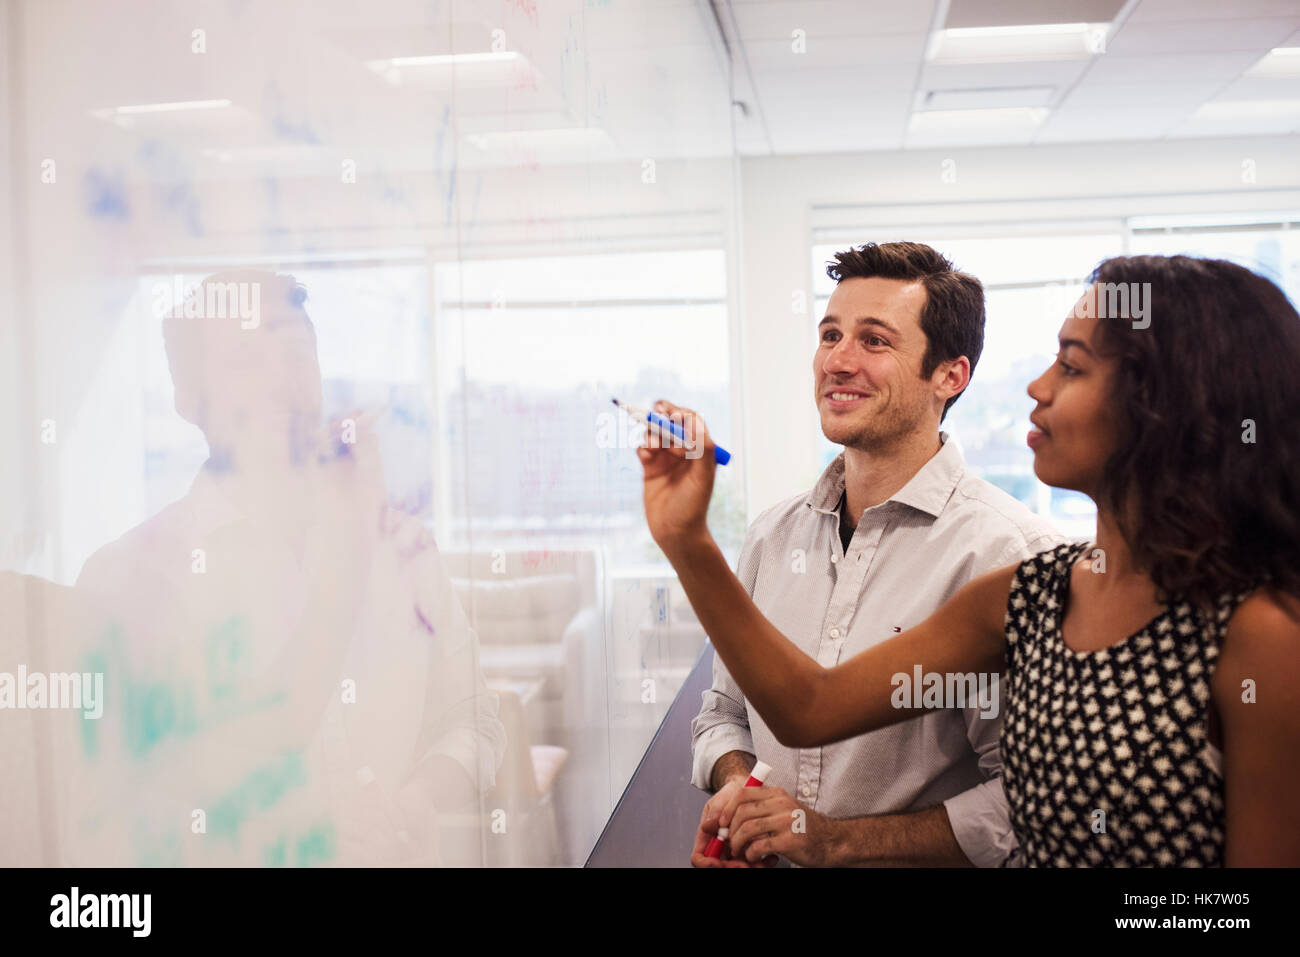 A man and a woman standing in a classroom in front of a whiteboard. Stock Photo